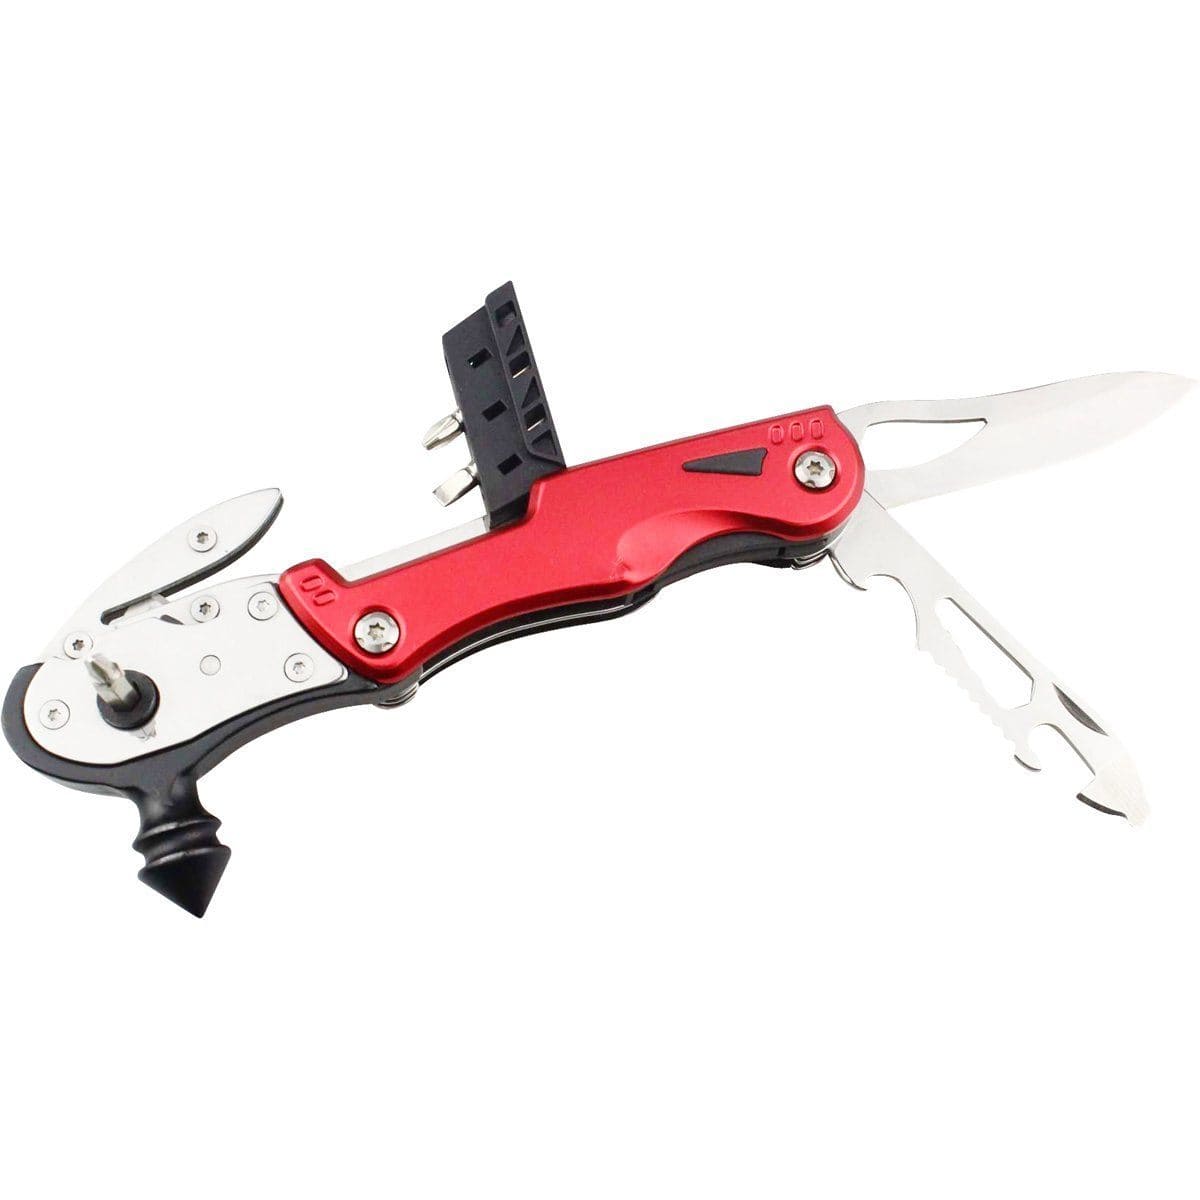 Miniature diecast metal tools(Hammer,Pliers,Sheers,Wrench,Switchblade etc)